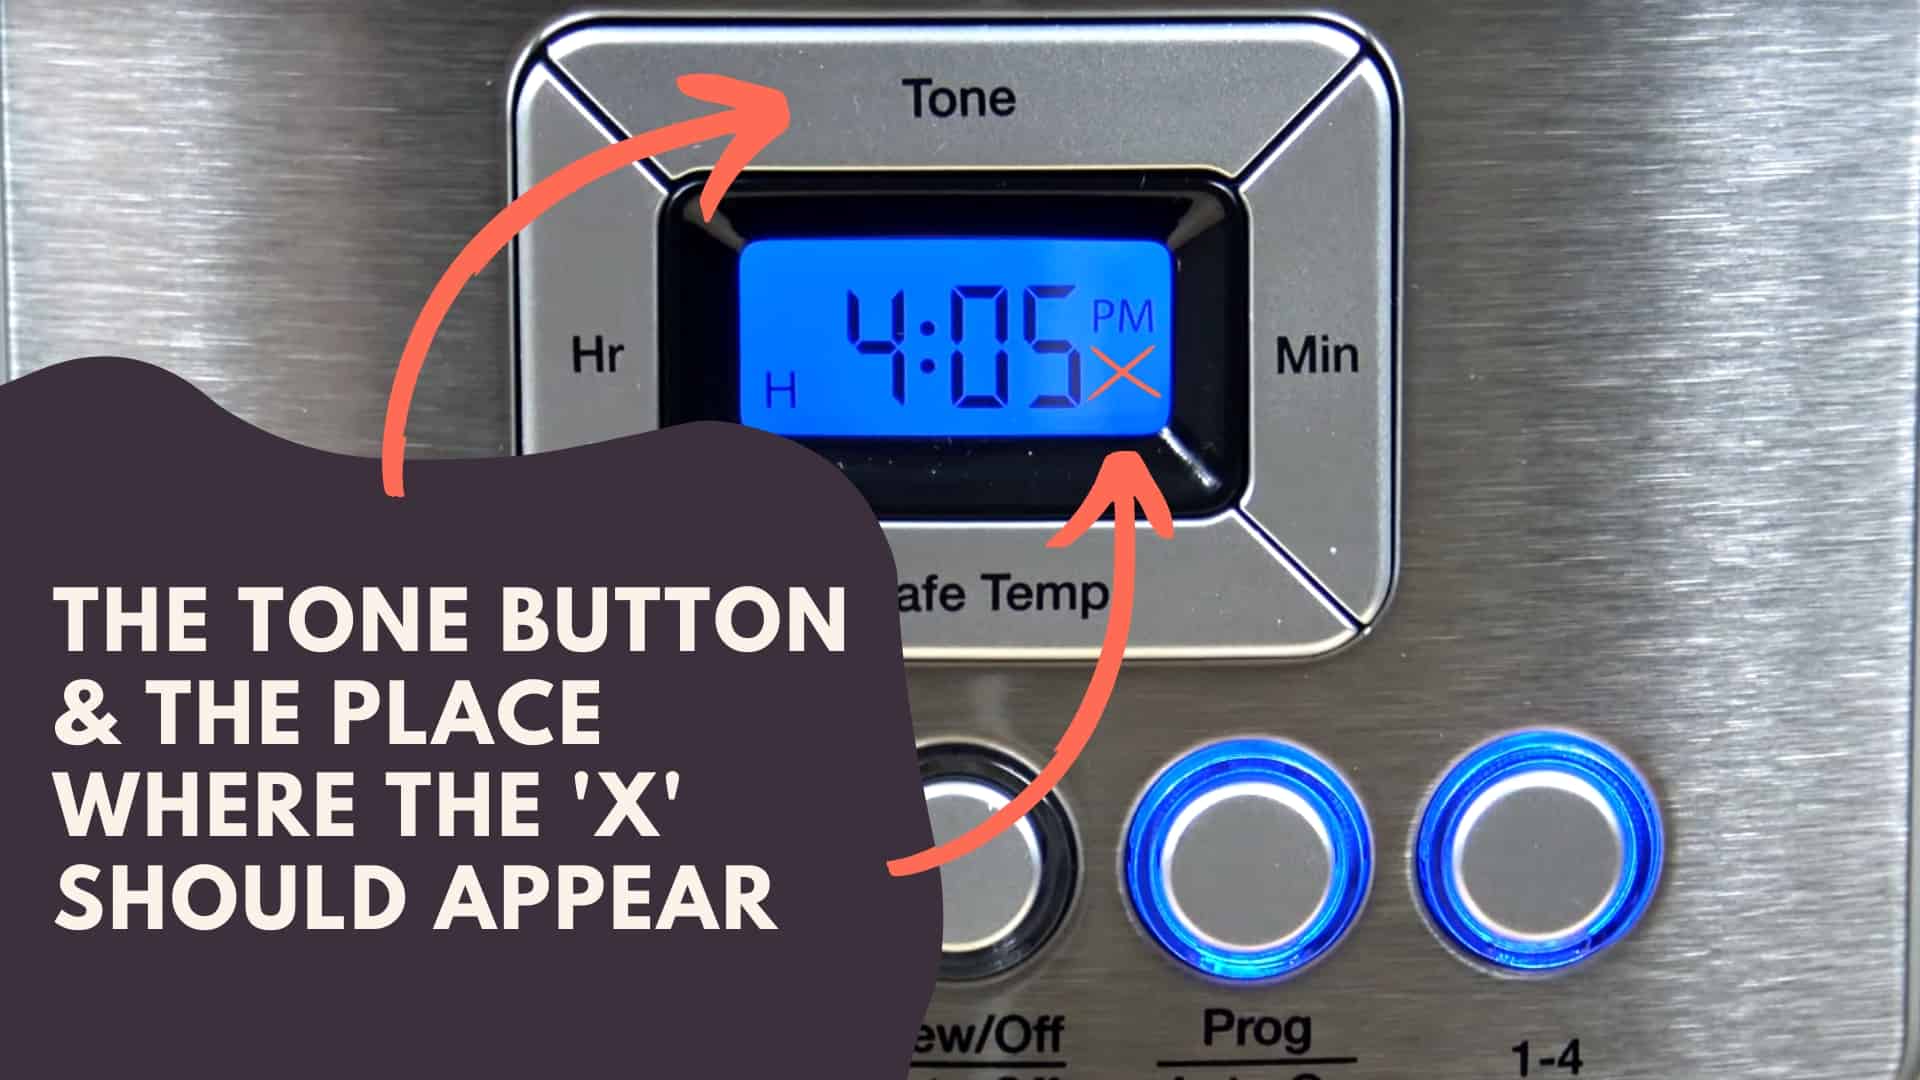 The Tone Button & the place where the 'X' should appear